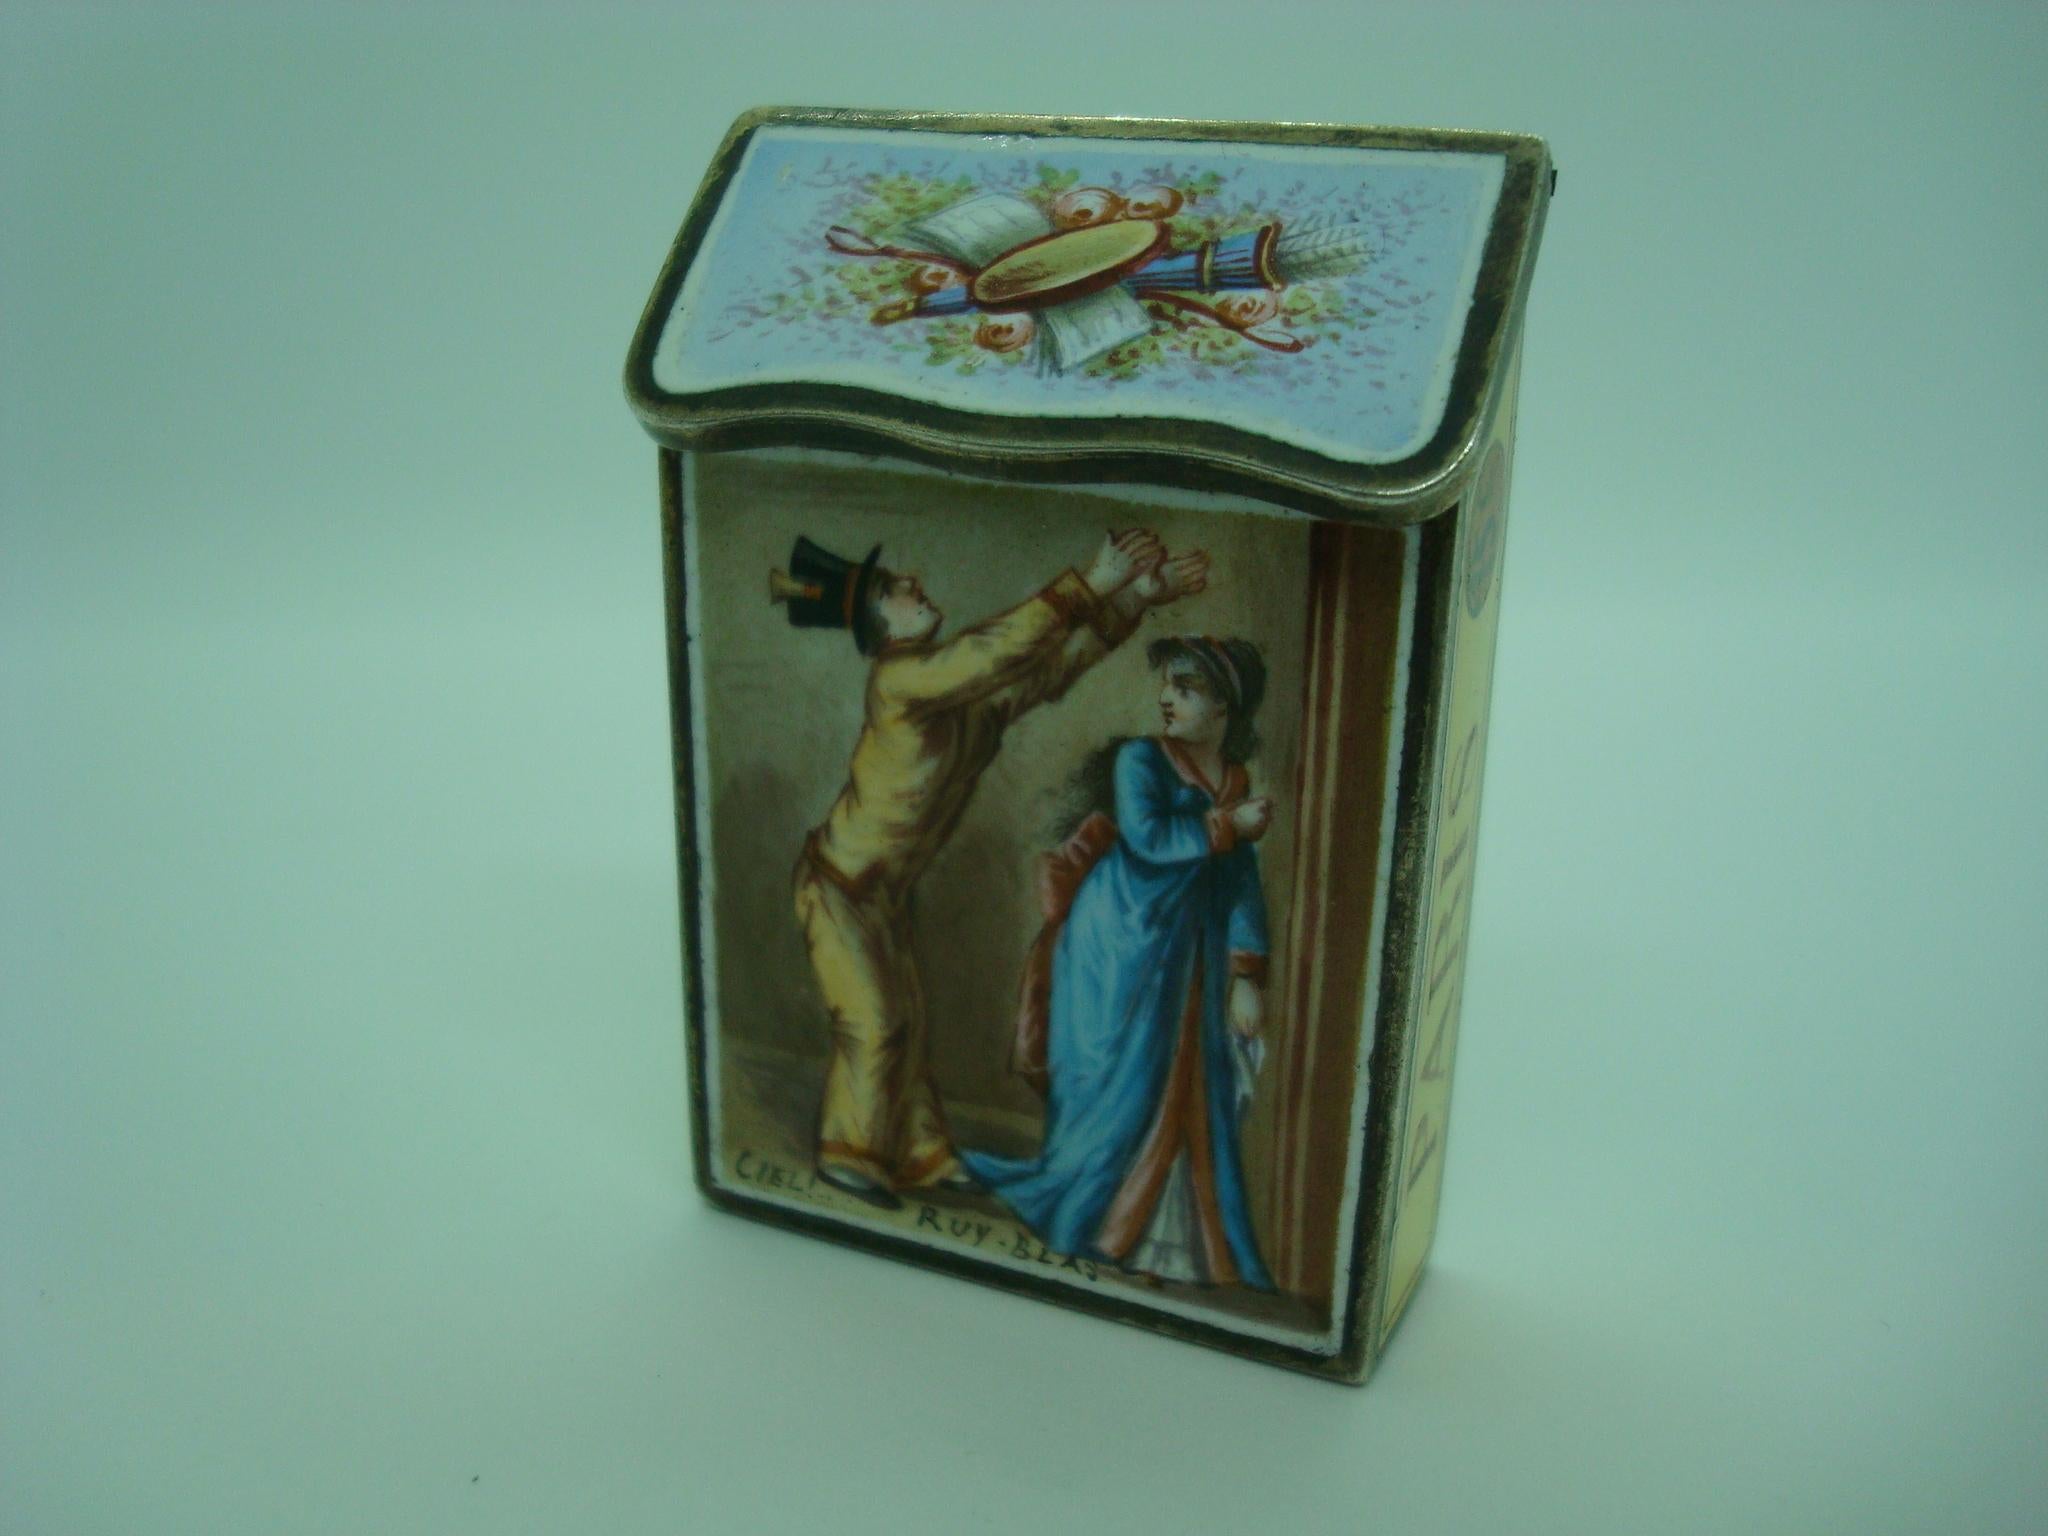 An exceptional, fine and impressive antique French silver and enamel vesta case.
It has it´s original Box with the inscription of the shop in Montevideo (Uruguay) that sold it.

This exceptional antique silver and enamel vesta case has a plain